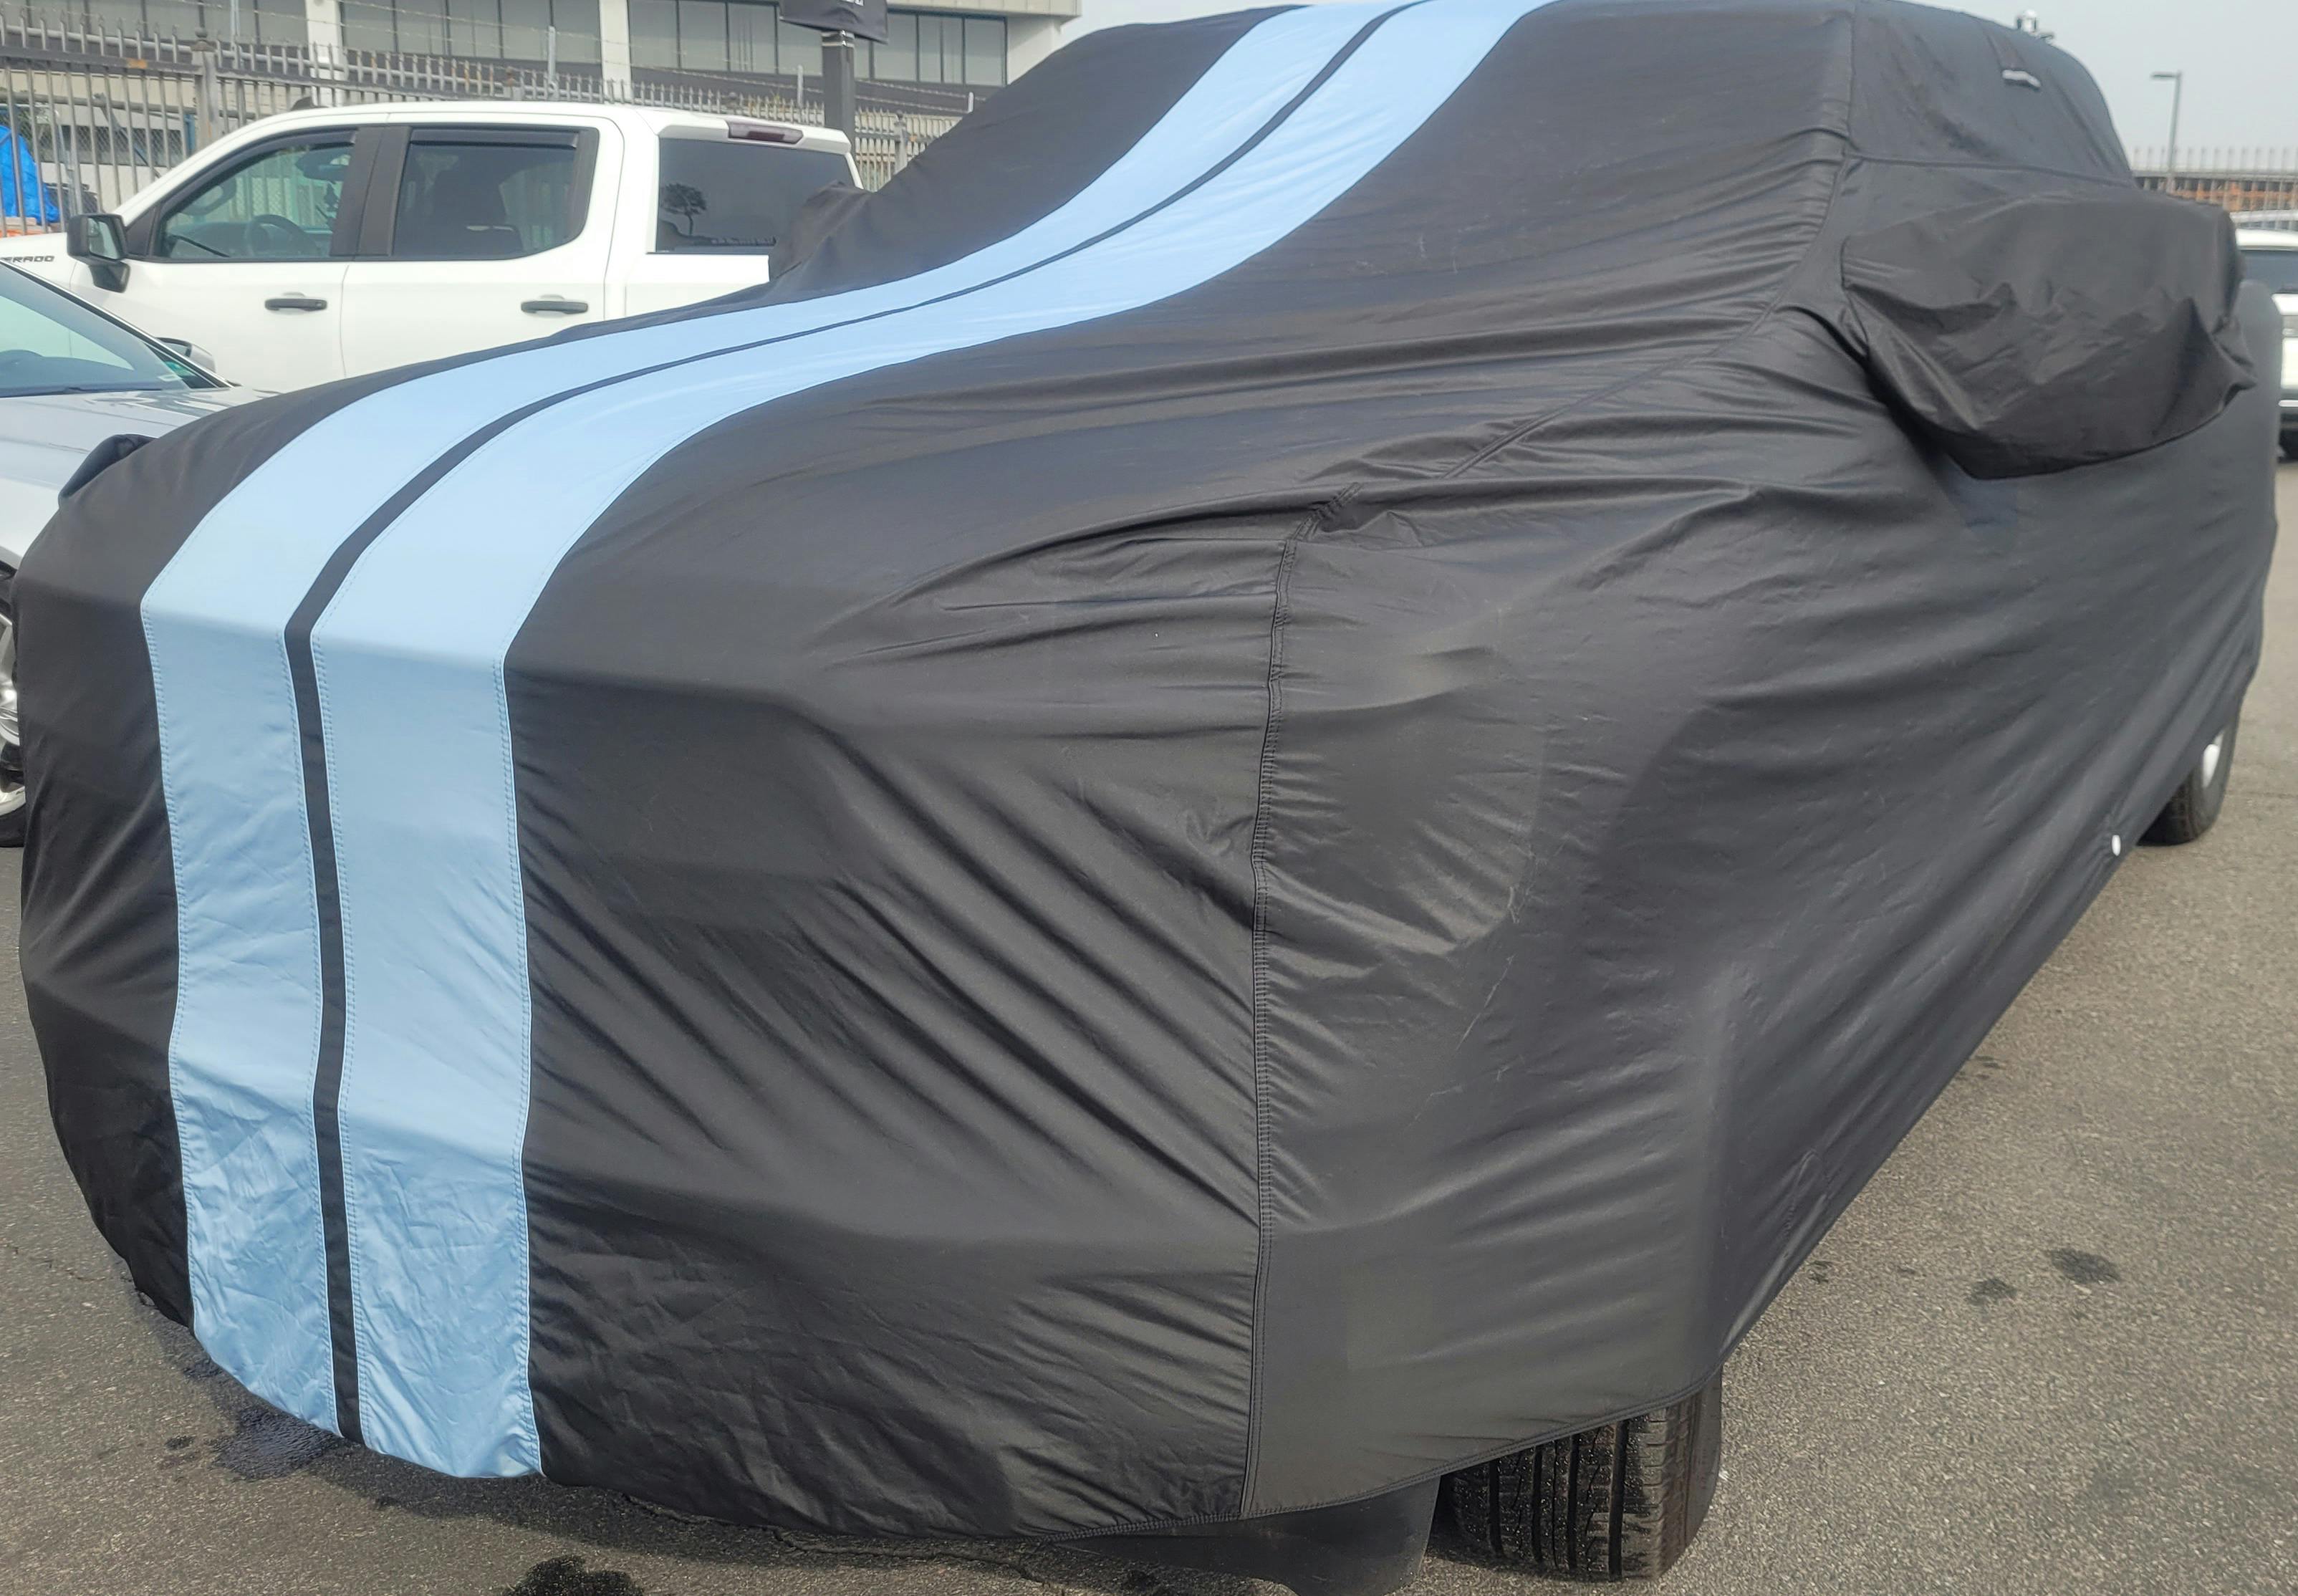  Car Cover Outdoor for OPEL Grandland, Car Cover Windproof  Dustproof UV Protection Full Car Covers for Outdoor(Color:CC) : Automotive